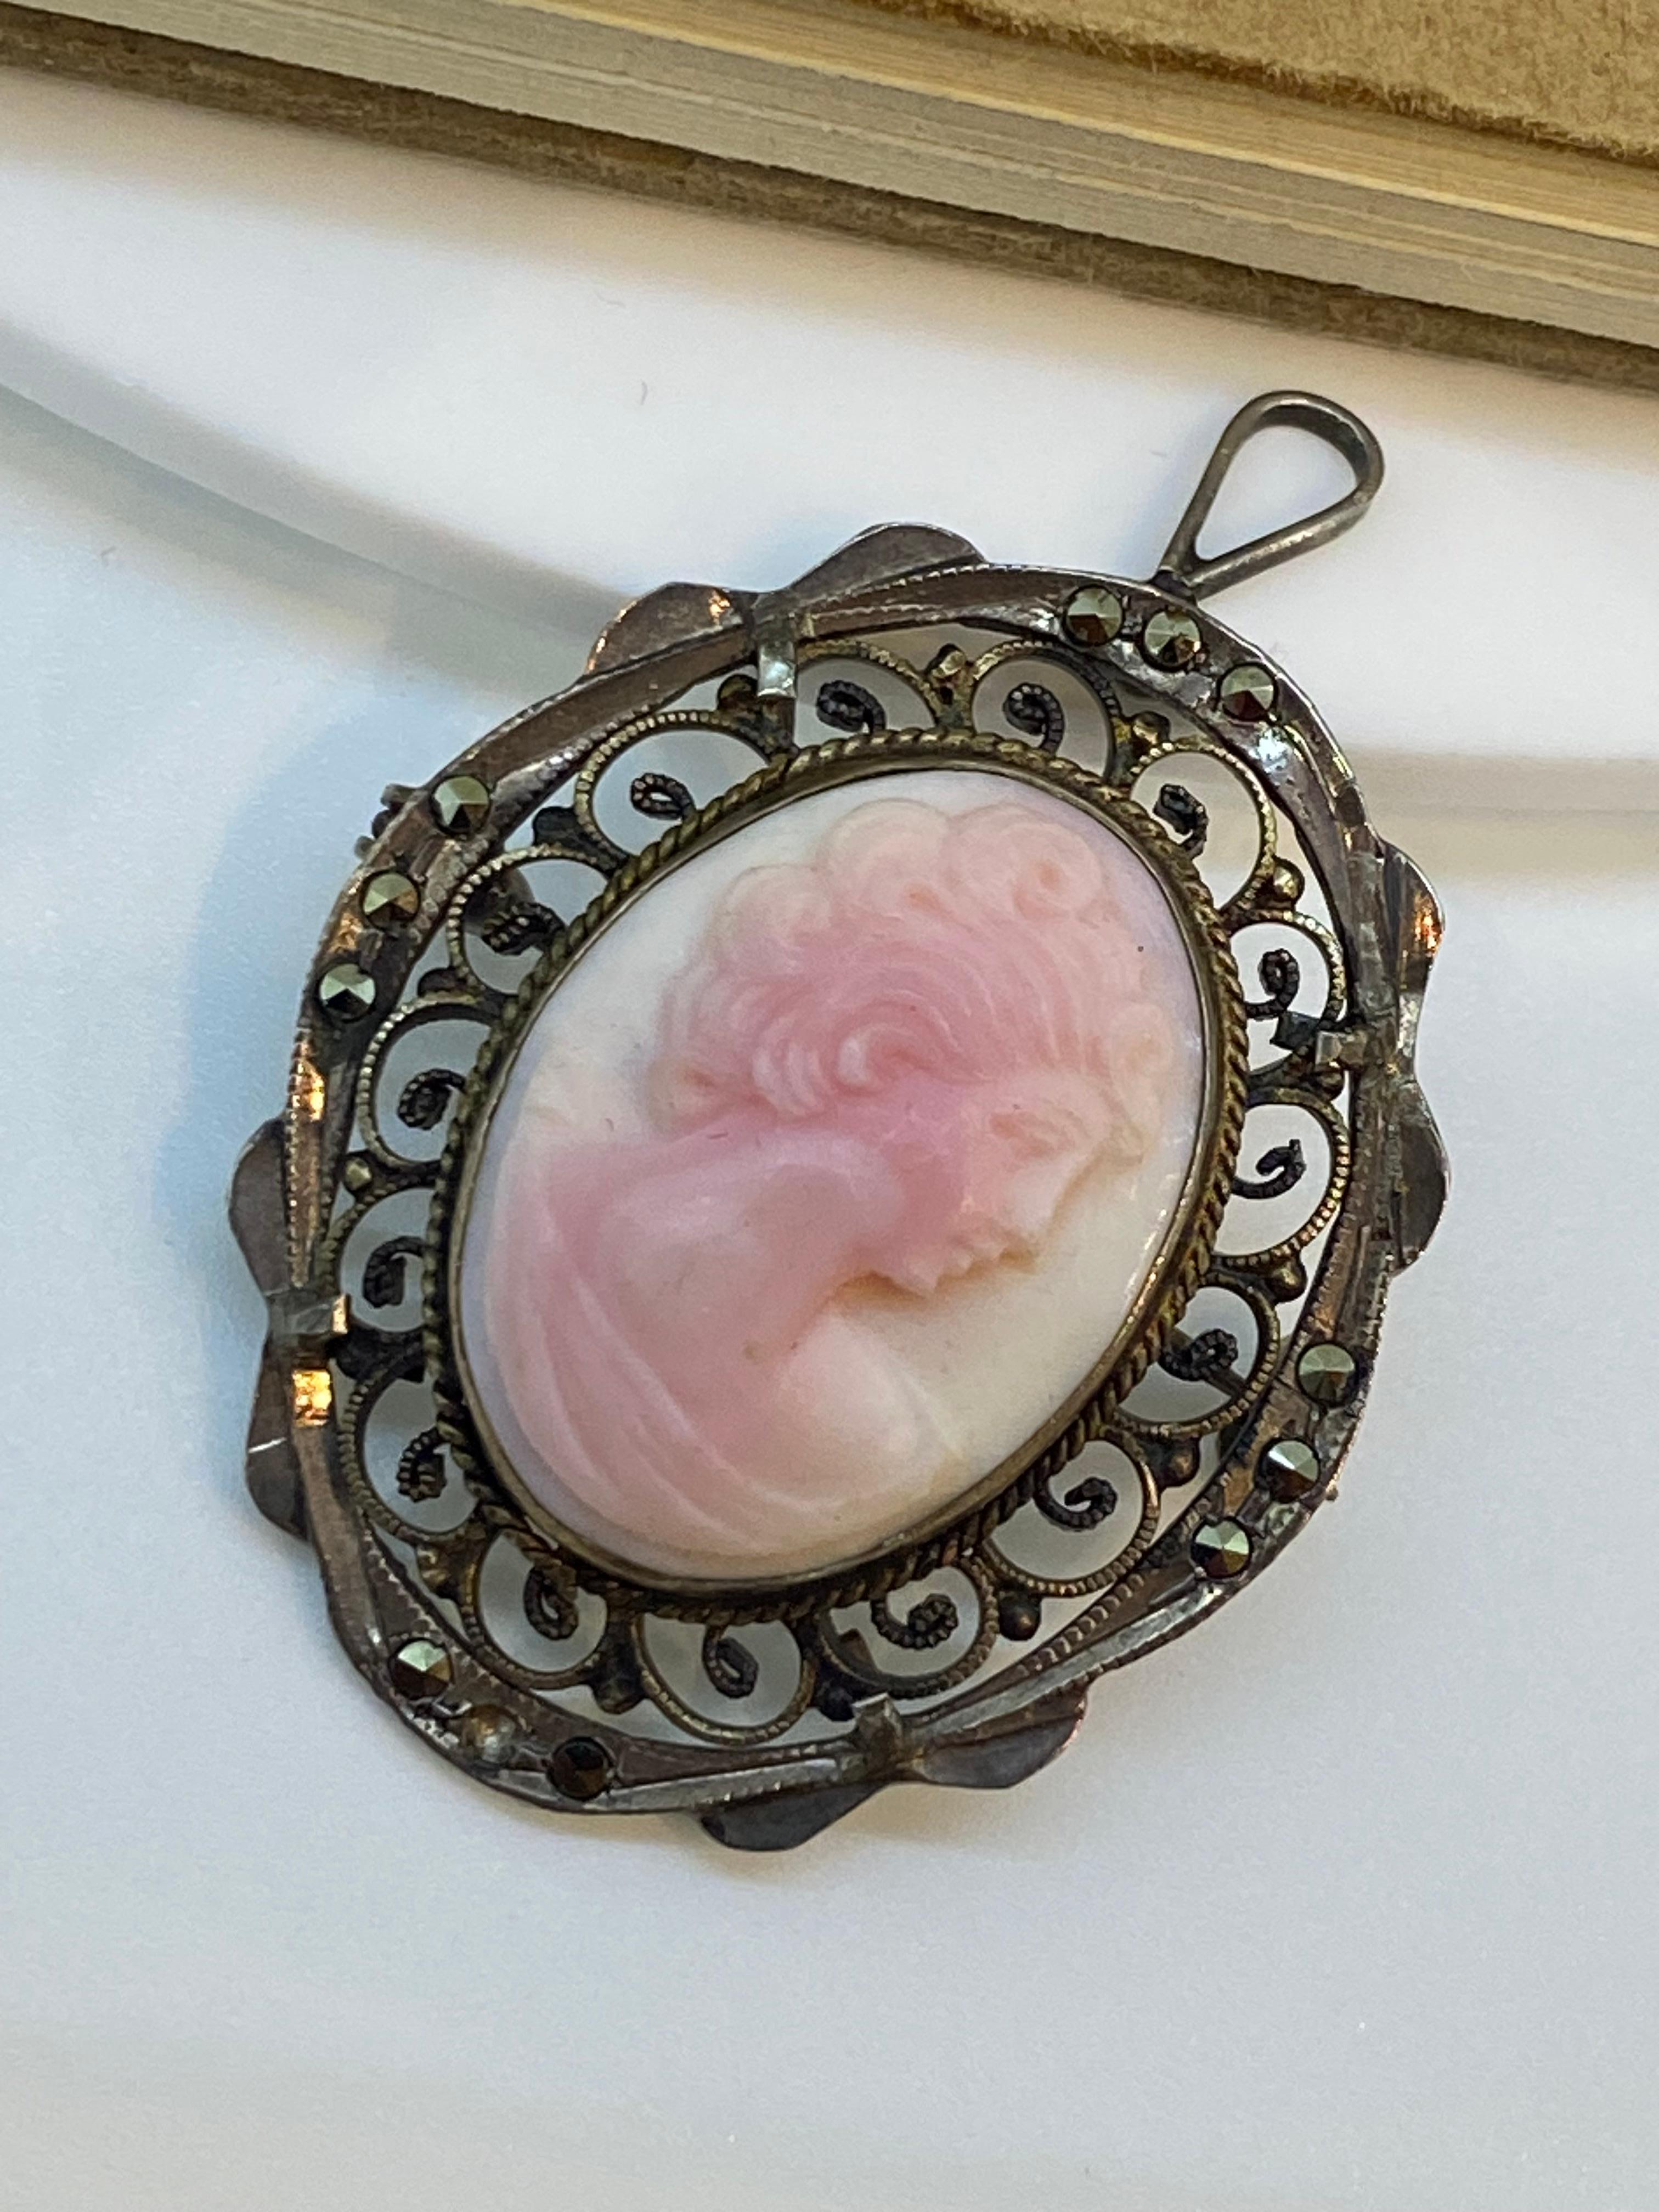 Women's Retro 1950's Finely Carved Pinkish White Coral Silver Cameo Brooch / Pendant For Sale